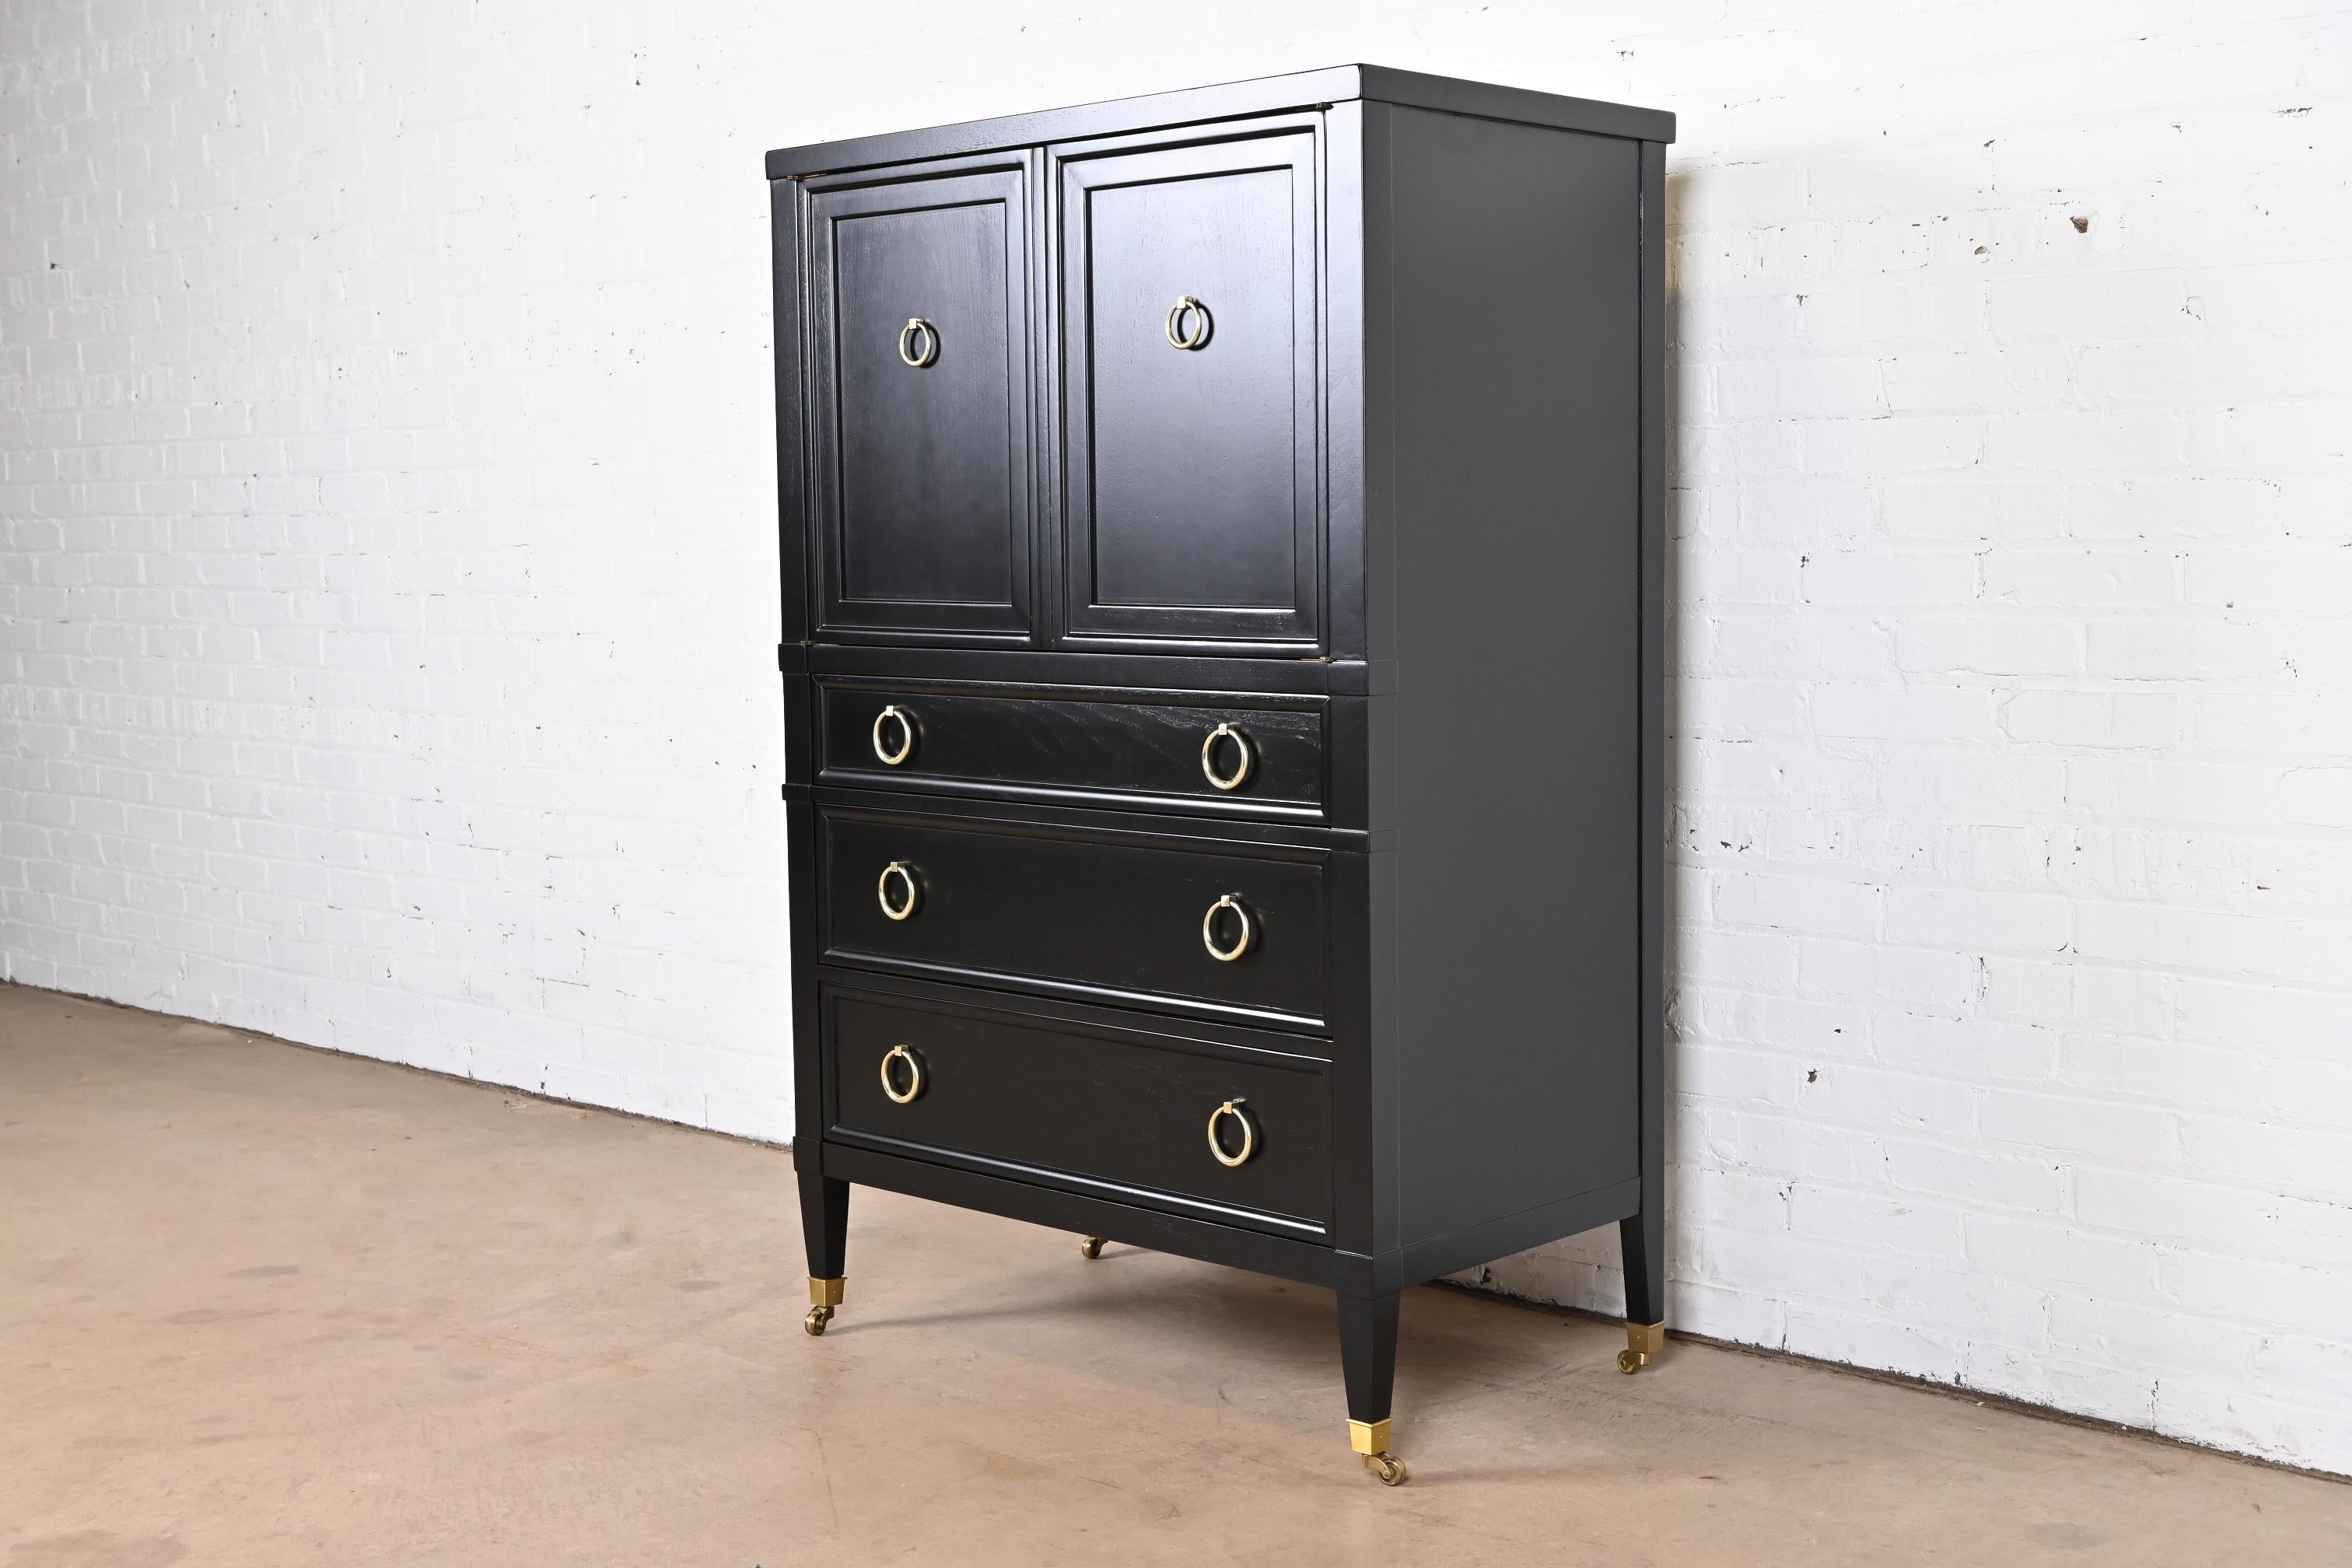 An exceptional mid-century French Regency Louis XVI six-drawer highboy dresser or chest of drawers

By Baker Furniture, 